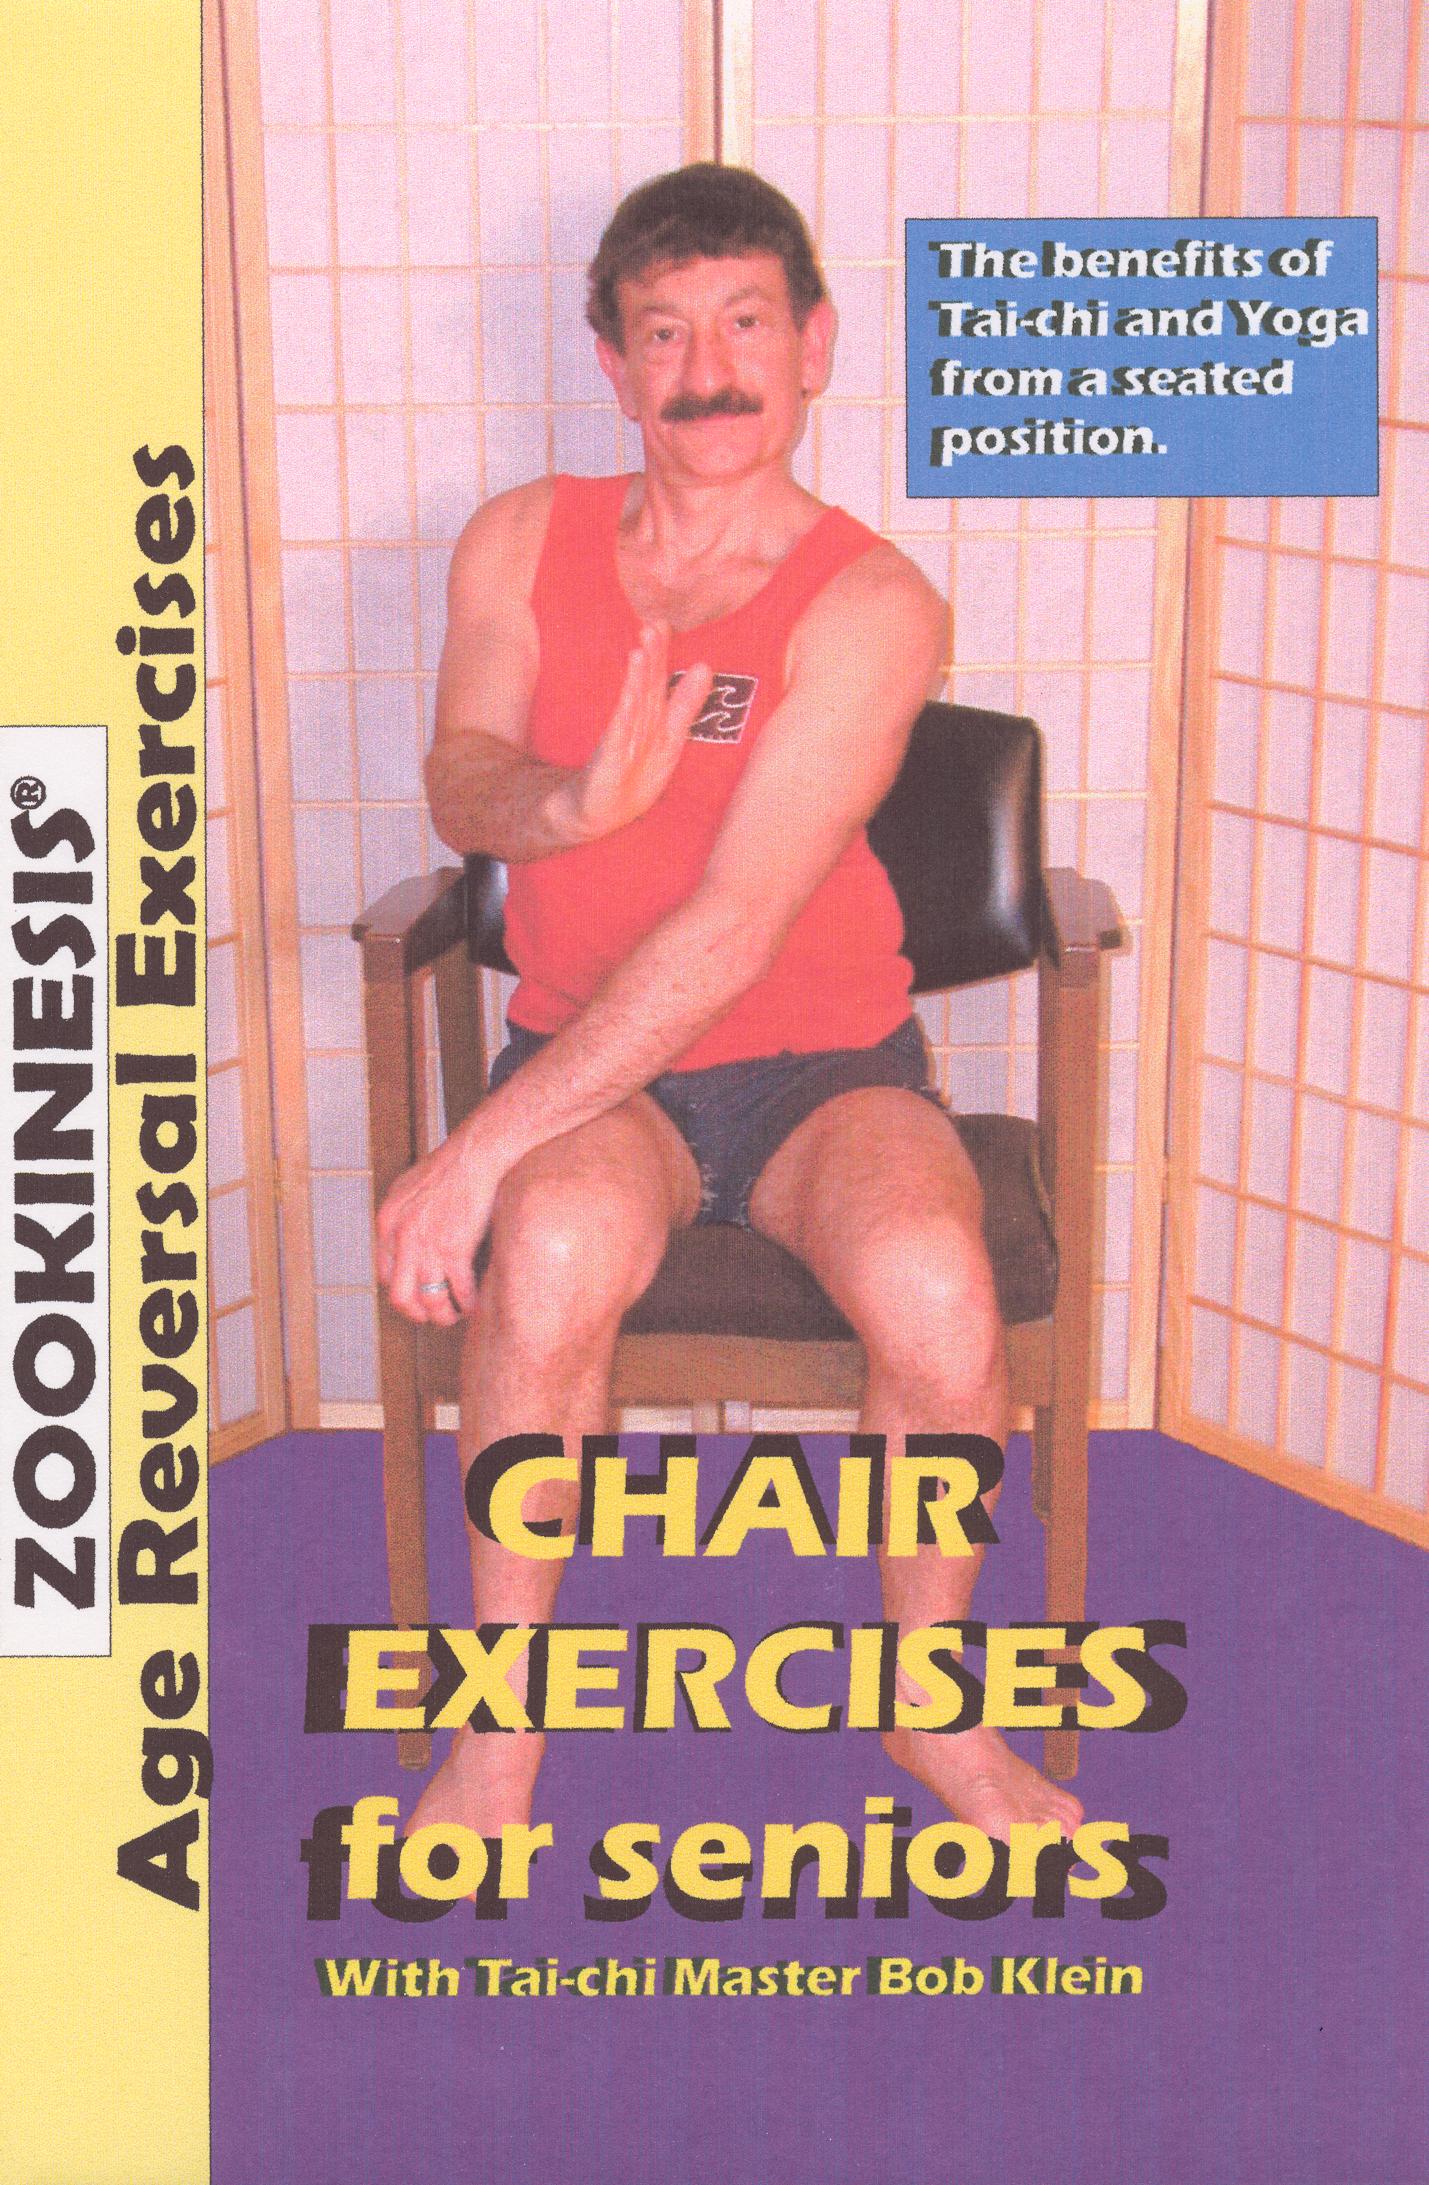 Chair exercises are beneficial for older adults